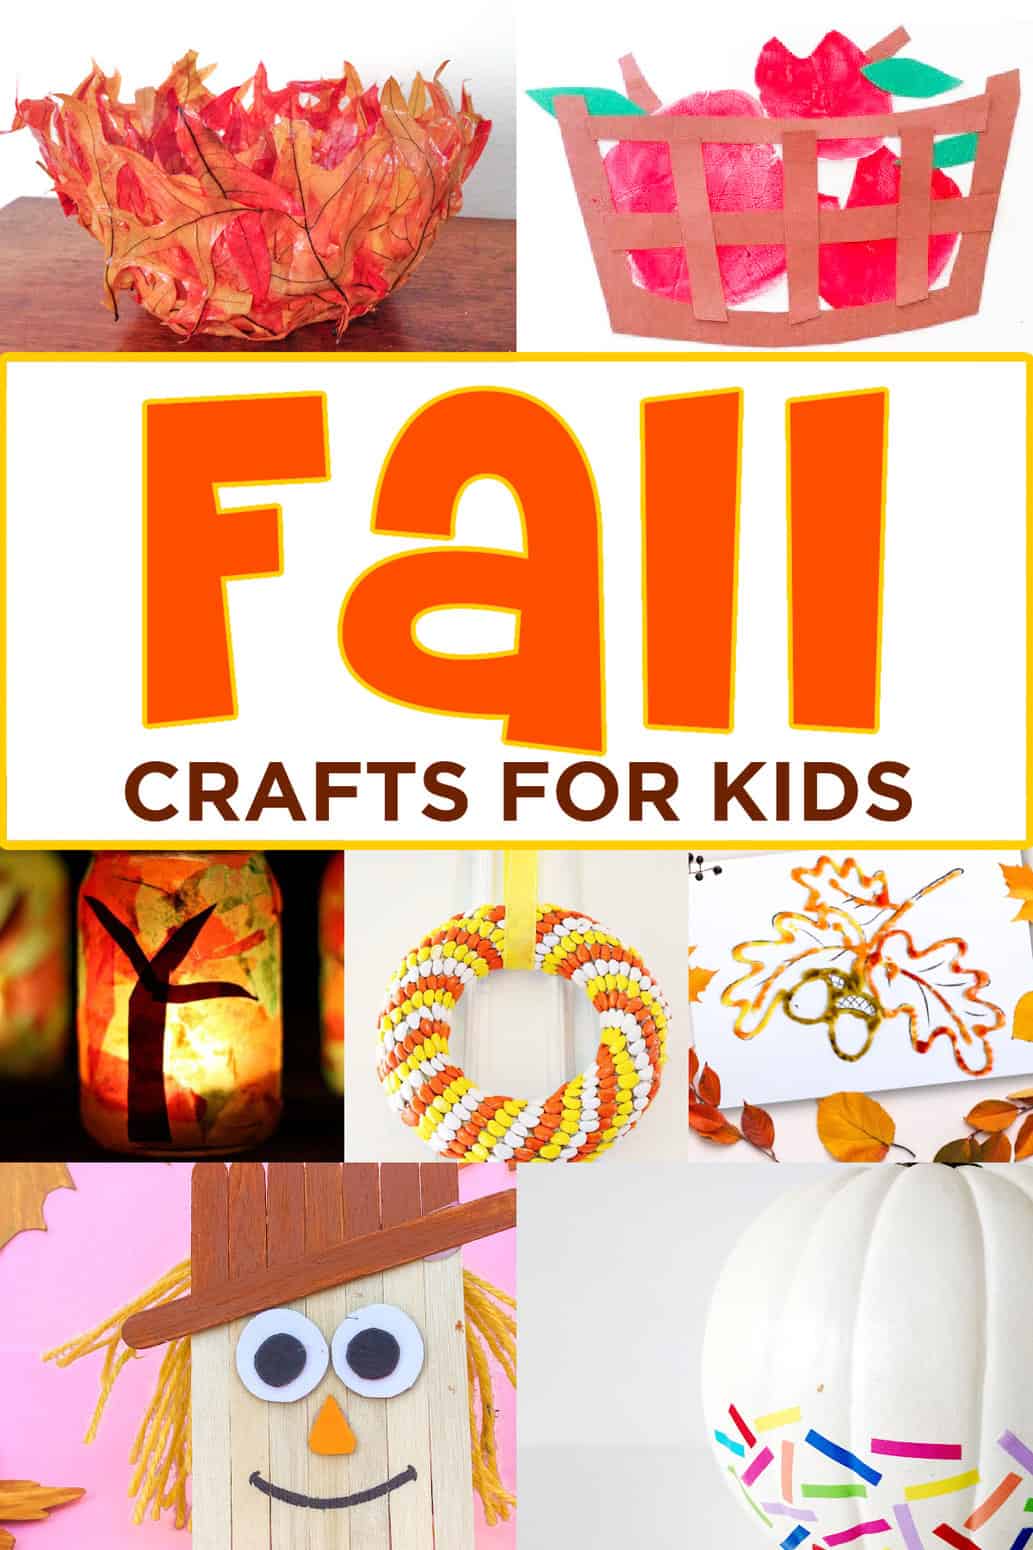 30 Easy Craft Ideas That Will Spark Your Creativity (DIY Projects